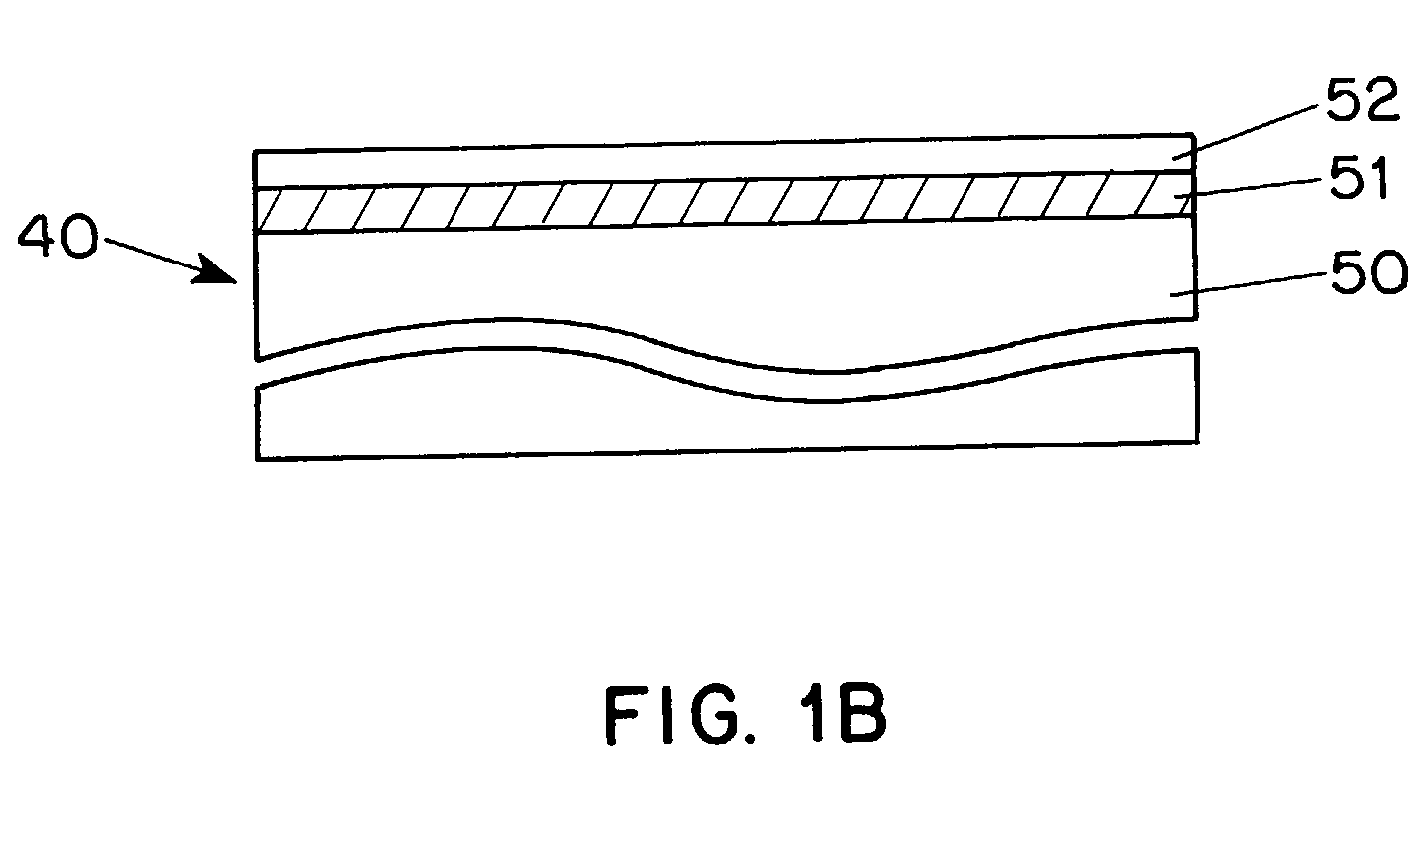 Method and apparatus for processing thin metal layers